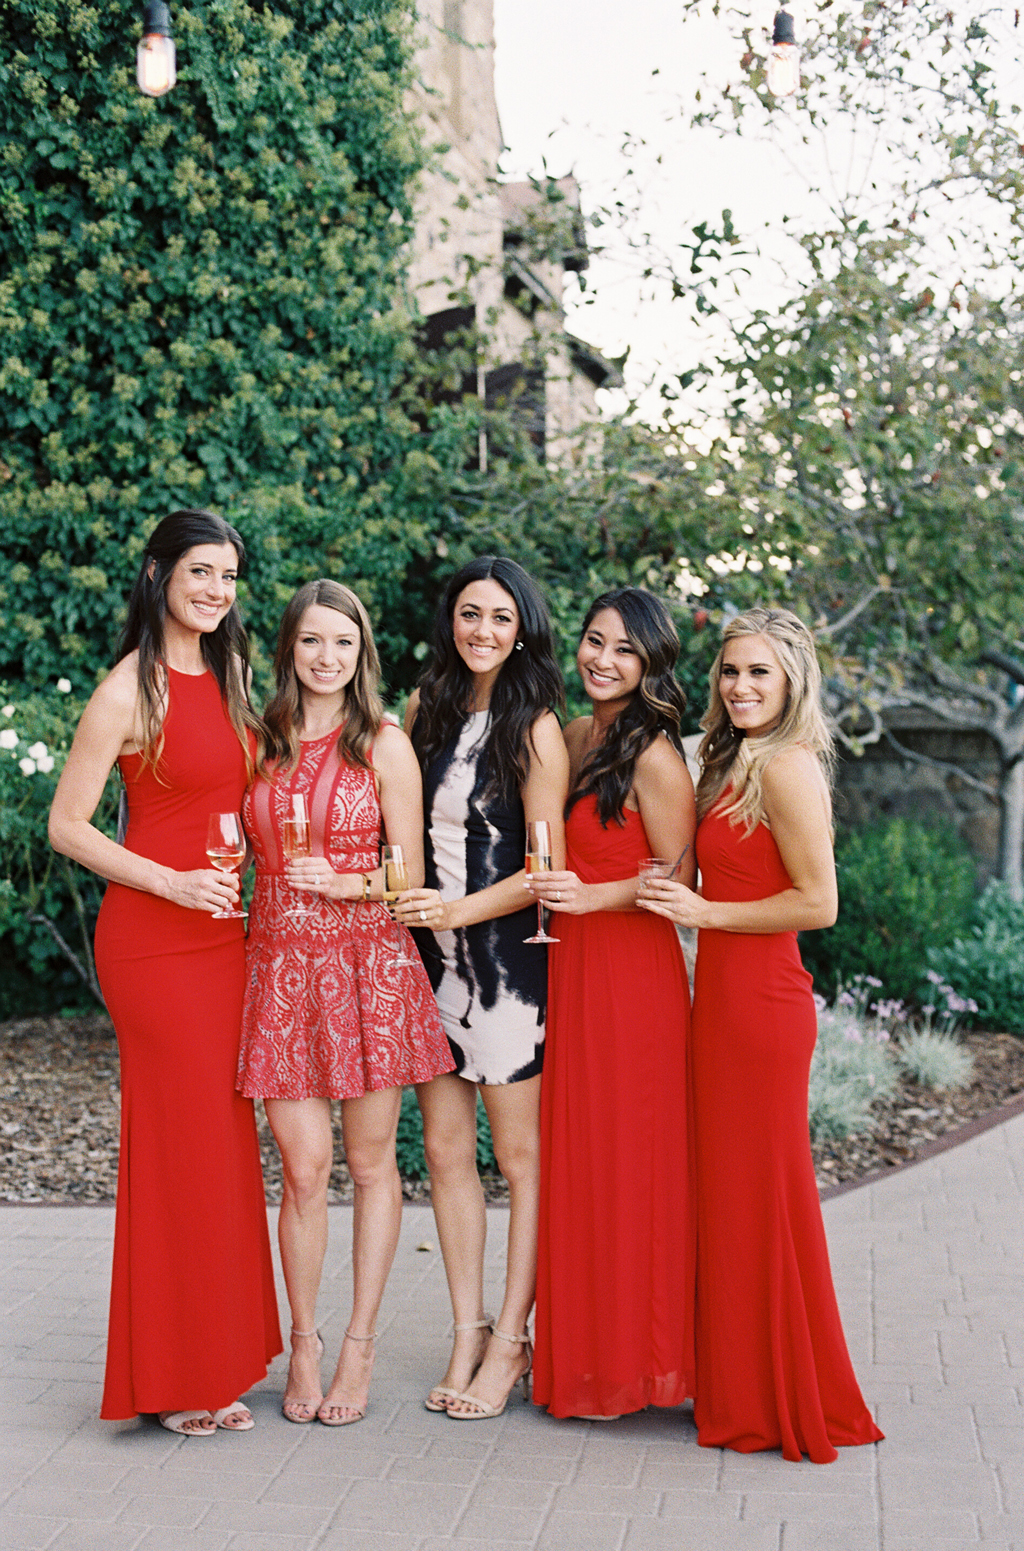 Bridesmaids wearing red dresses during the cocktail hour at a Napa Valley Wedding. 